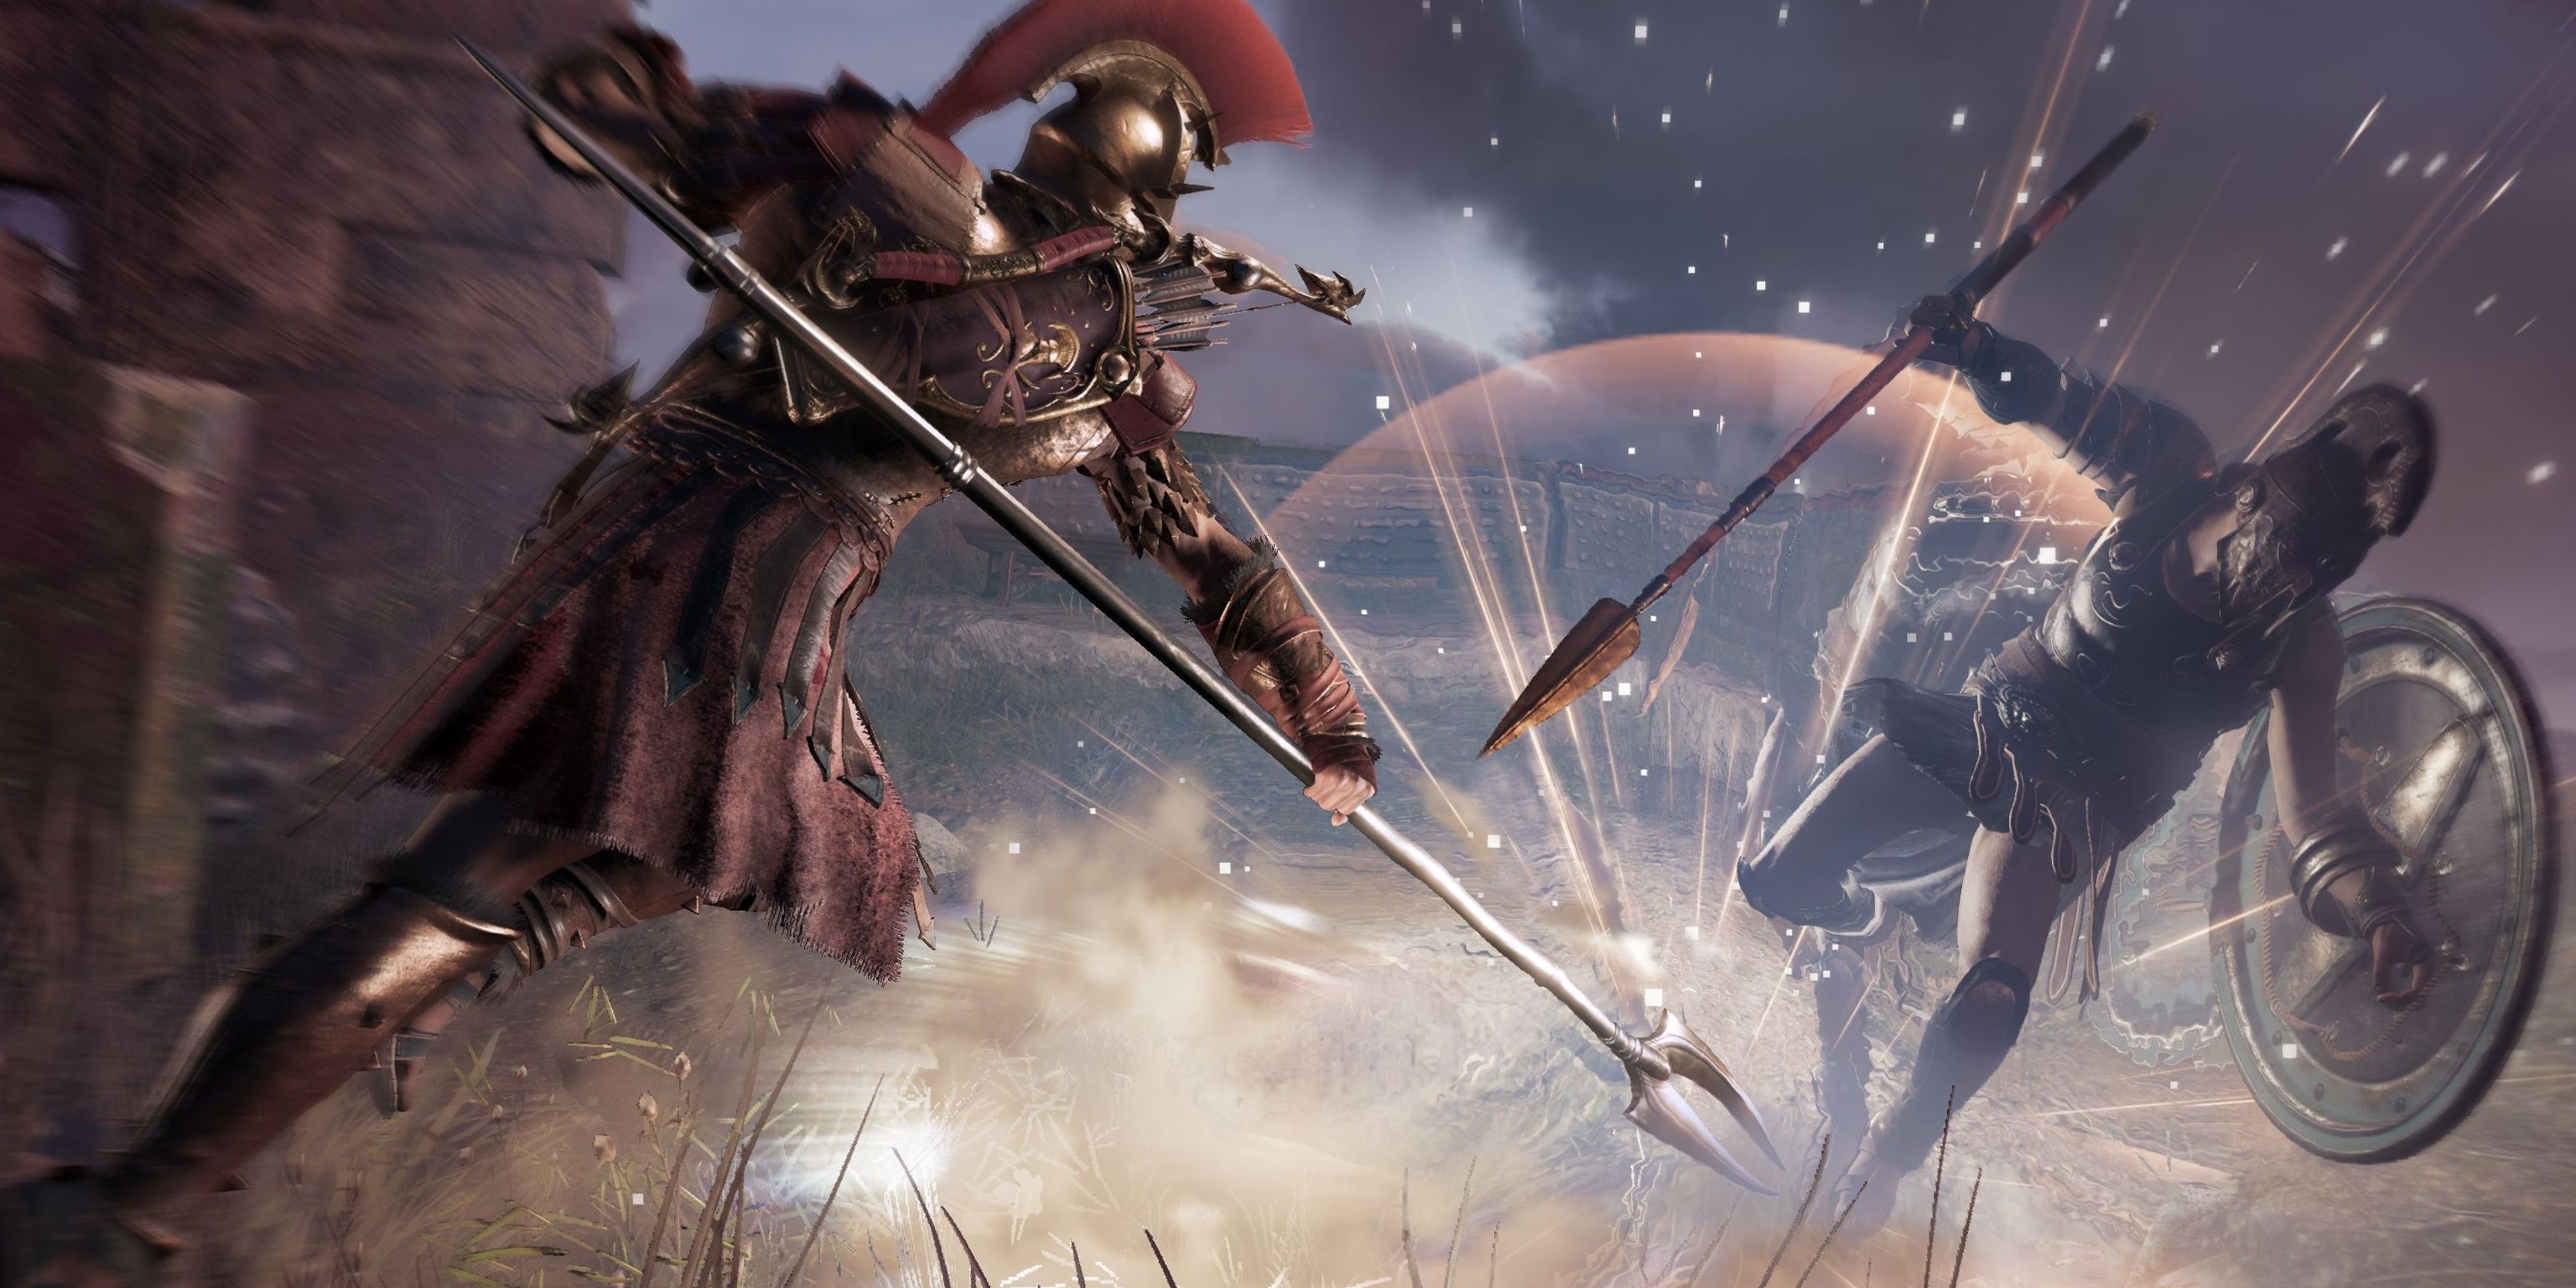 The player attacking an enemy with a spear in Assassin's Creed Odyssey